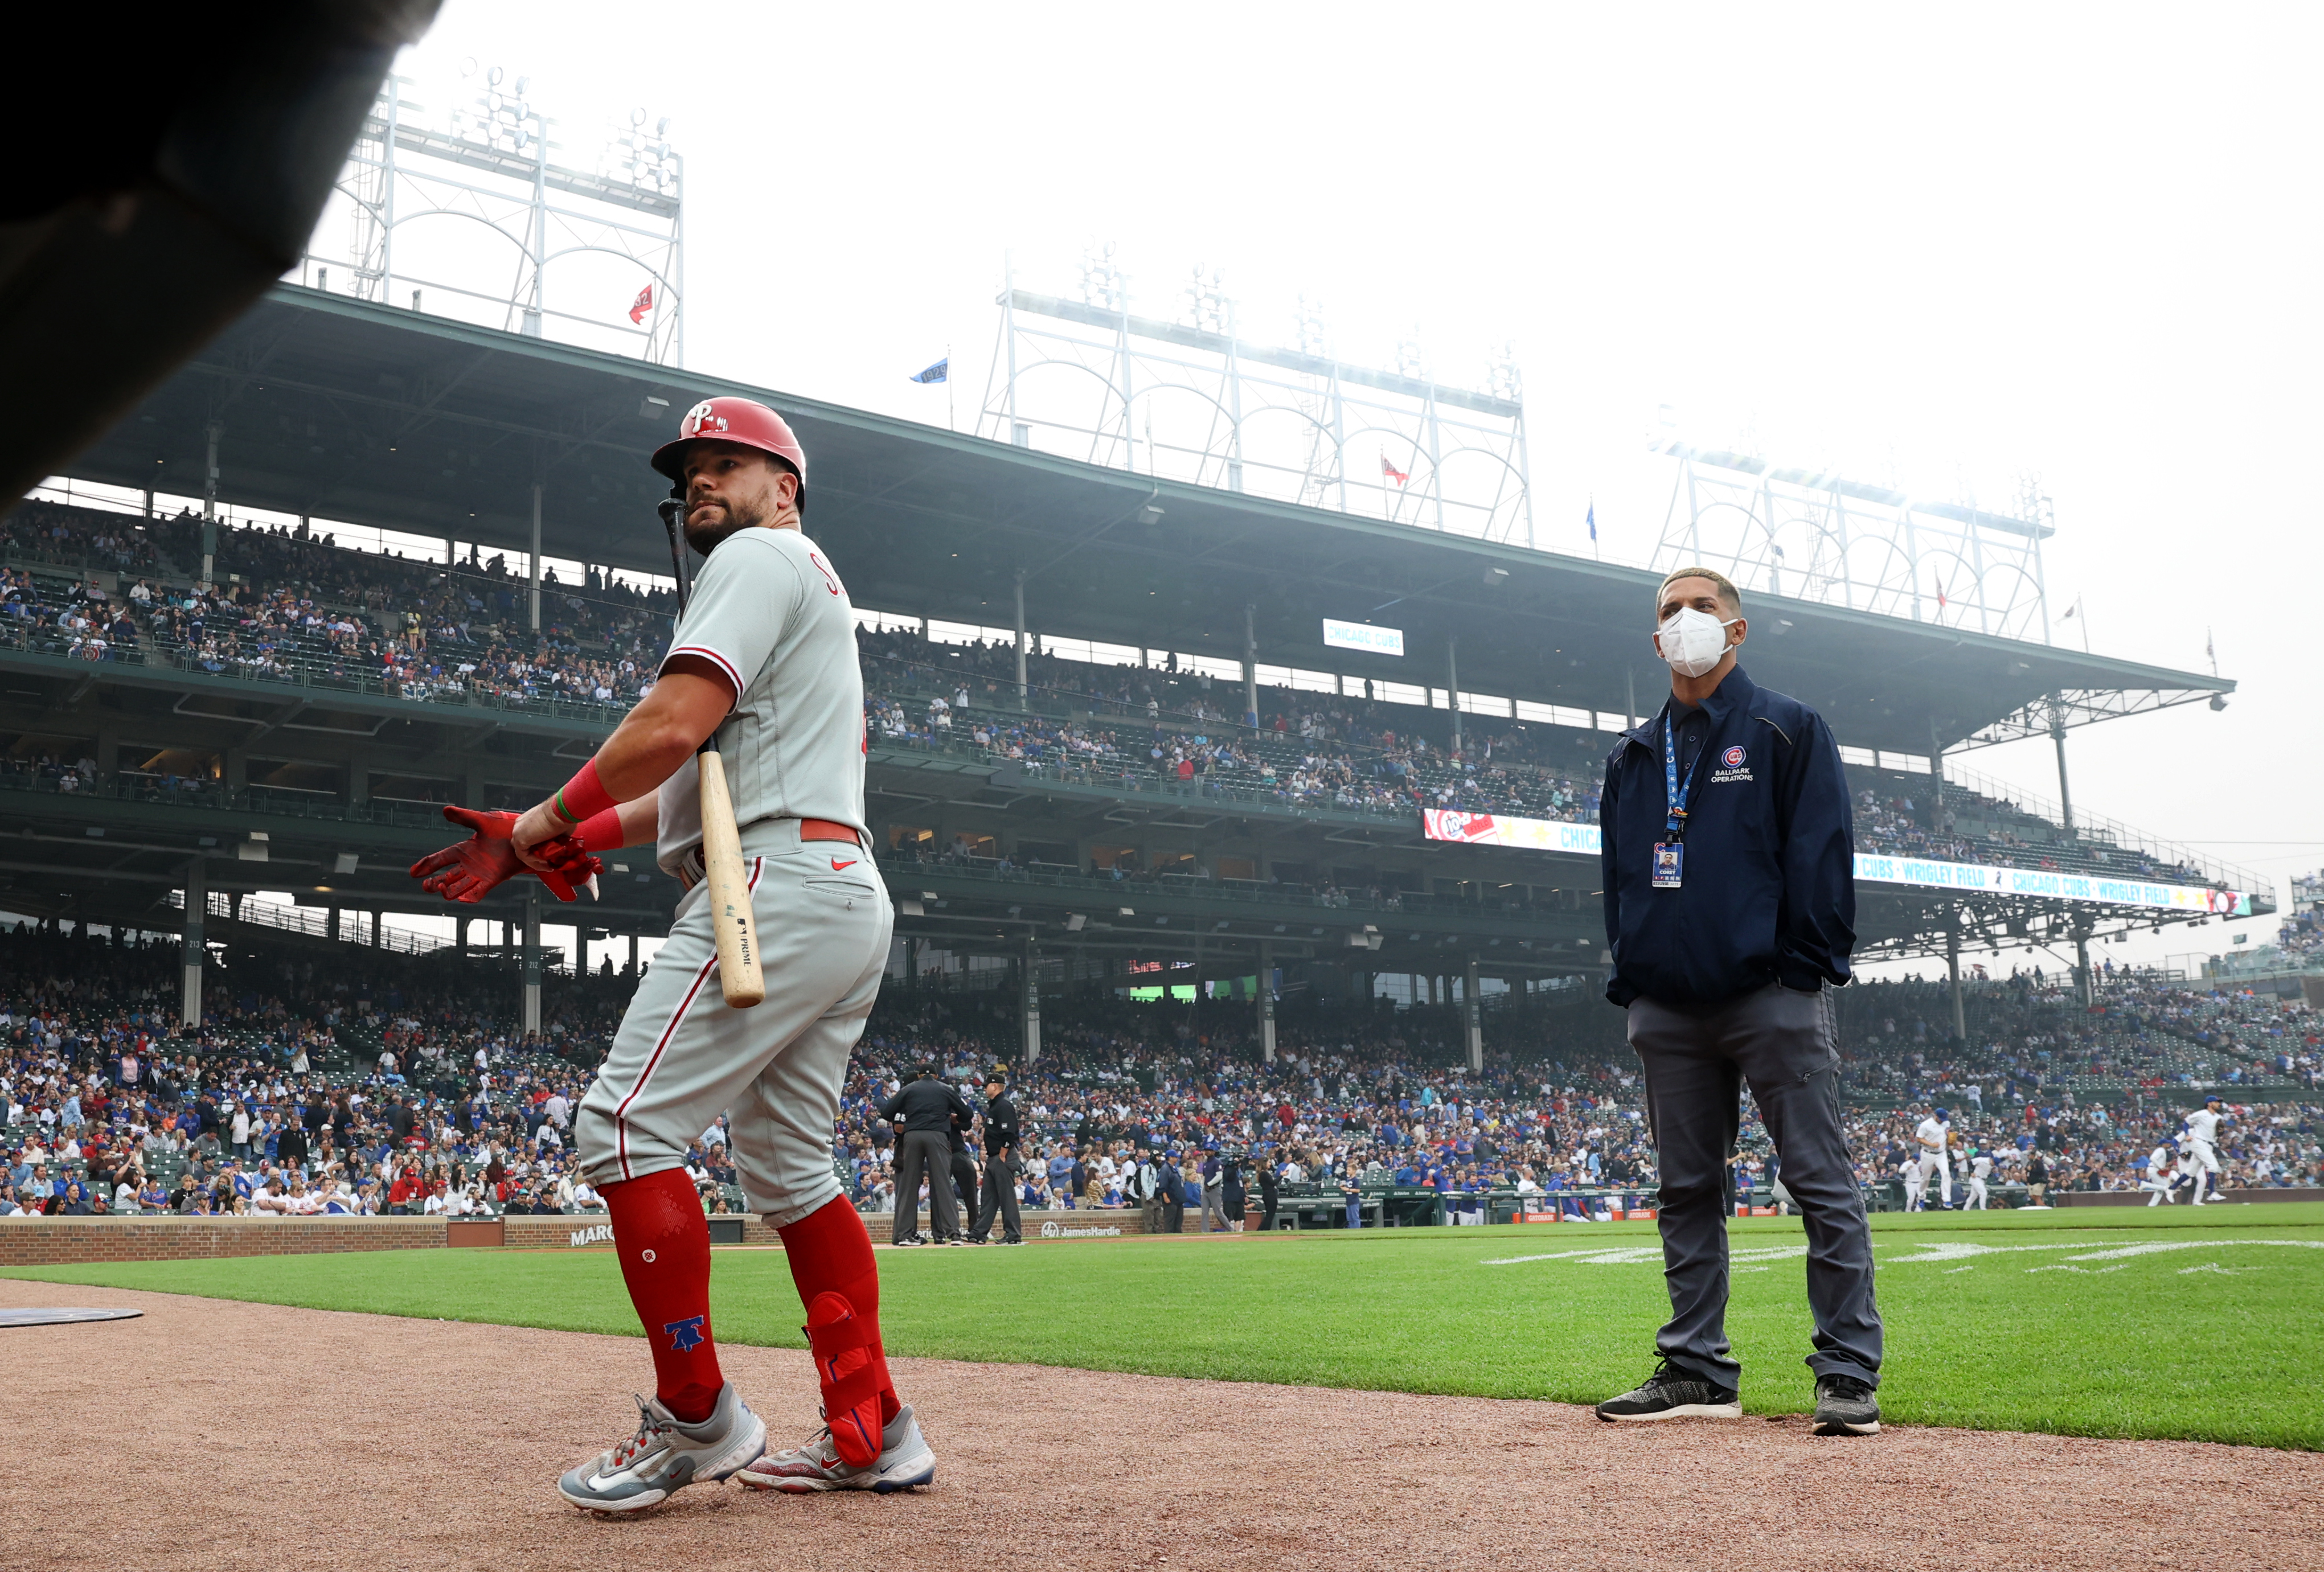 Chicago Cubs game goes on despite 'very unhealthy' air alert